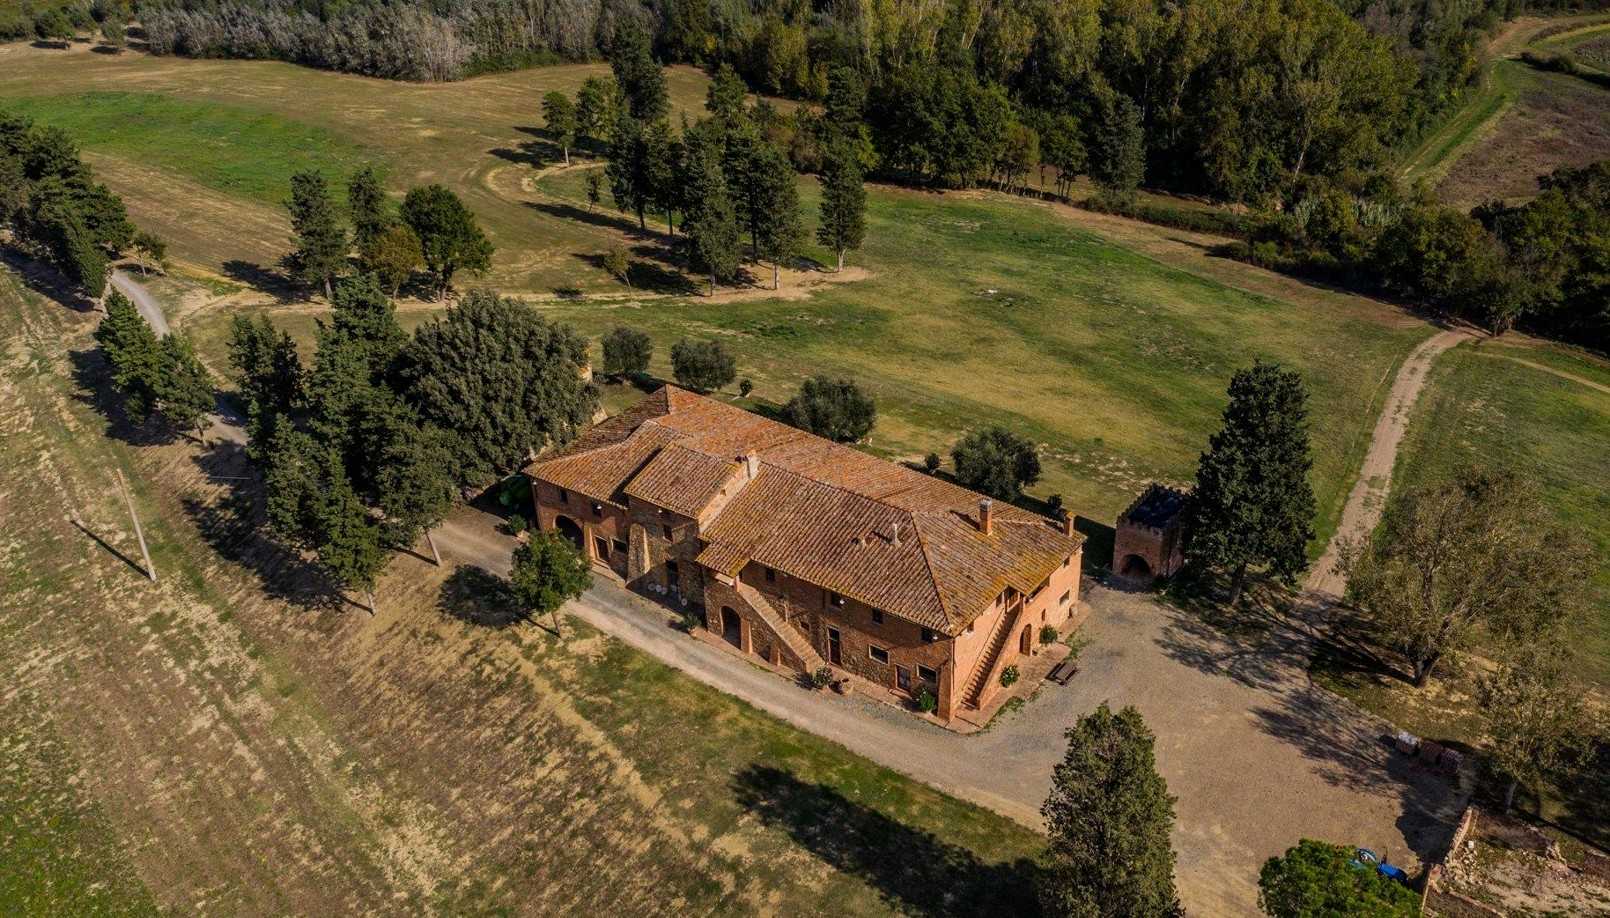 Photos Former monastery in great location with 100 hectares of land